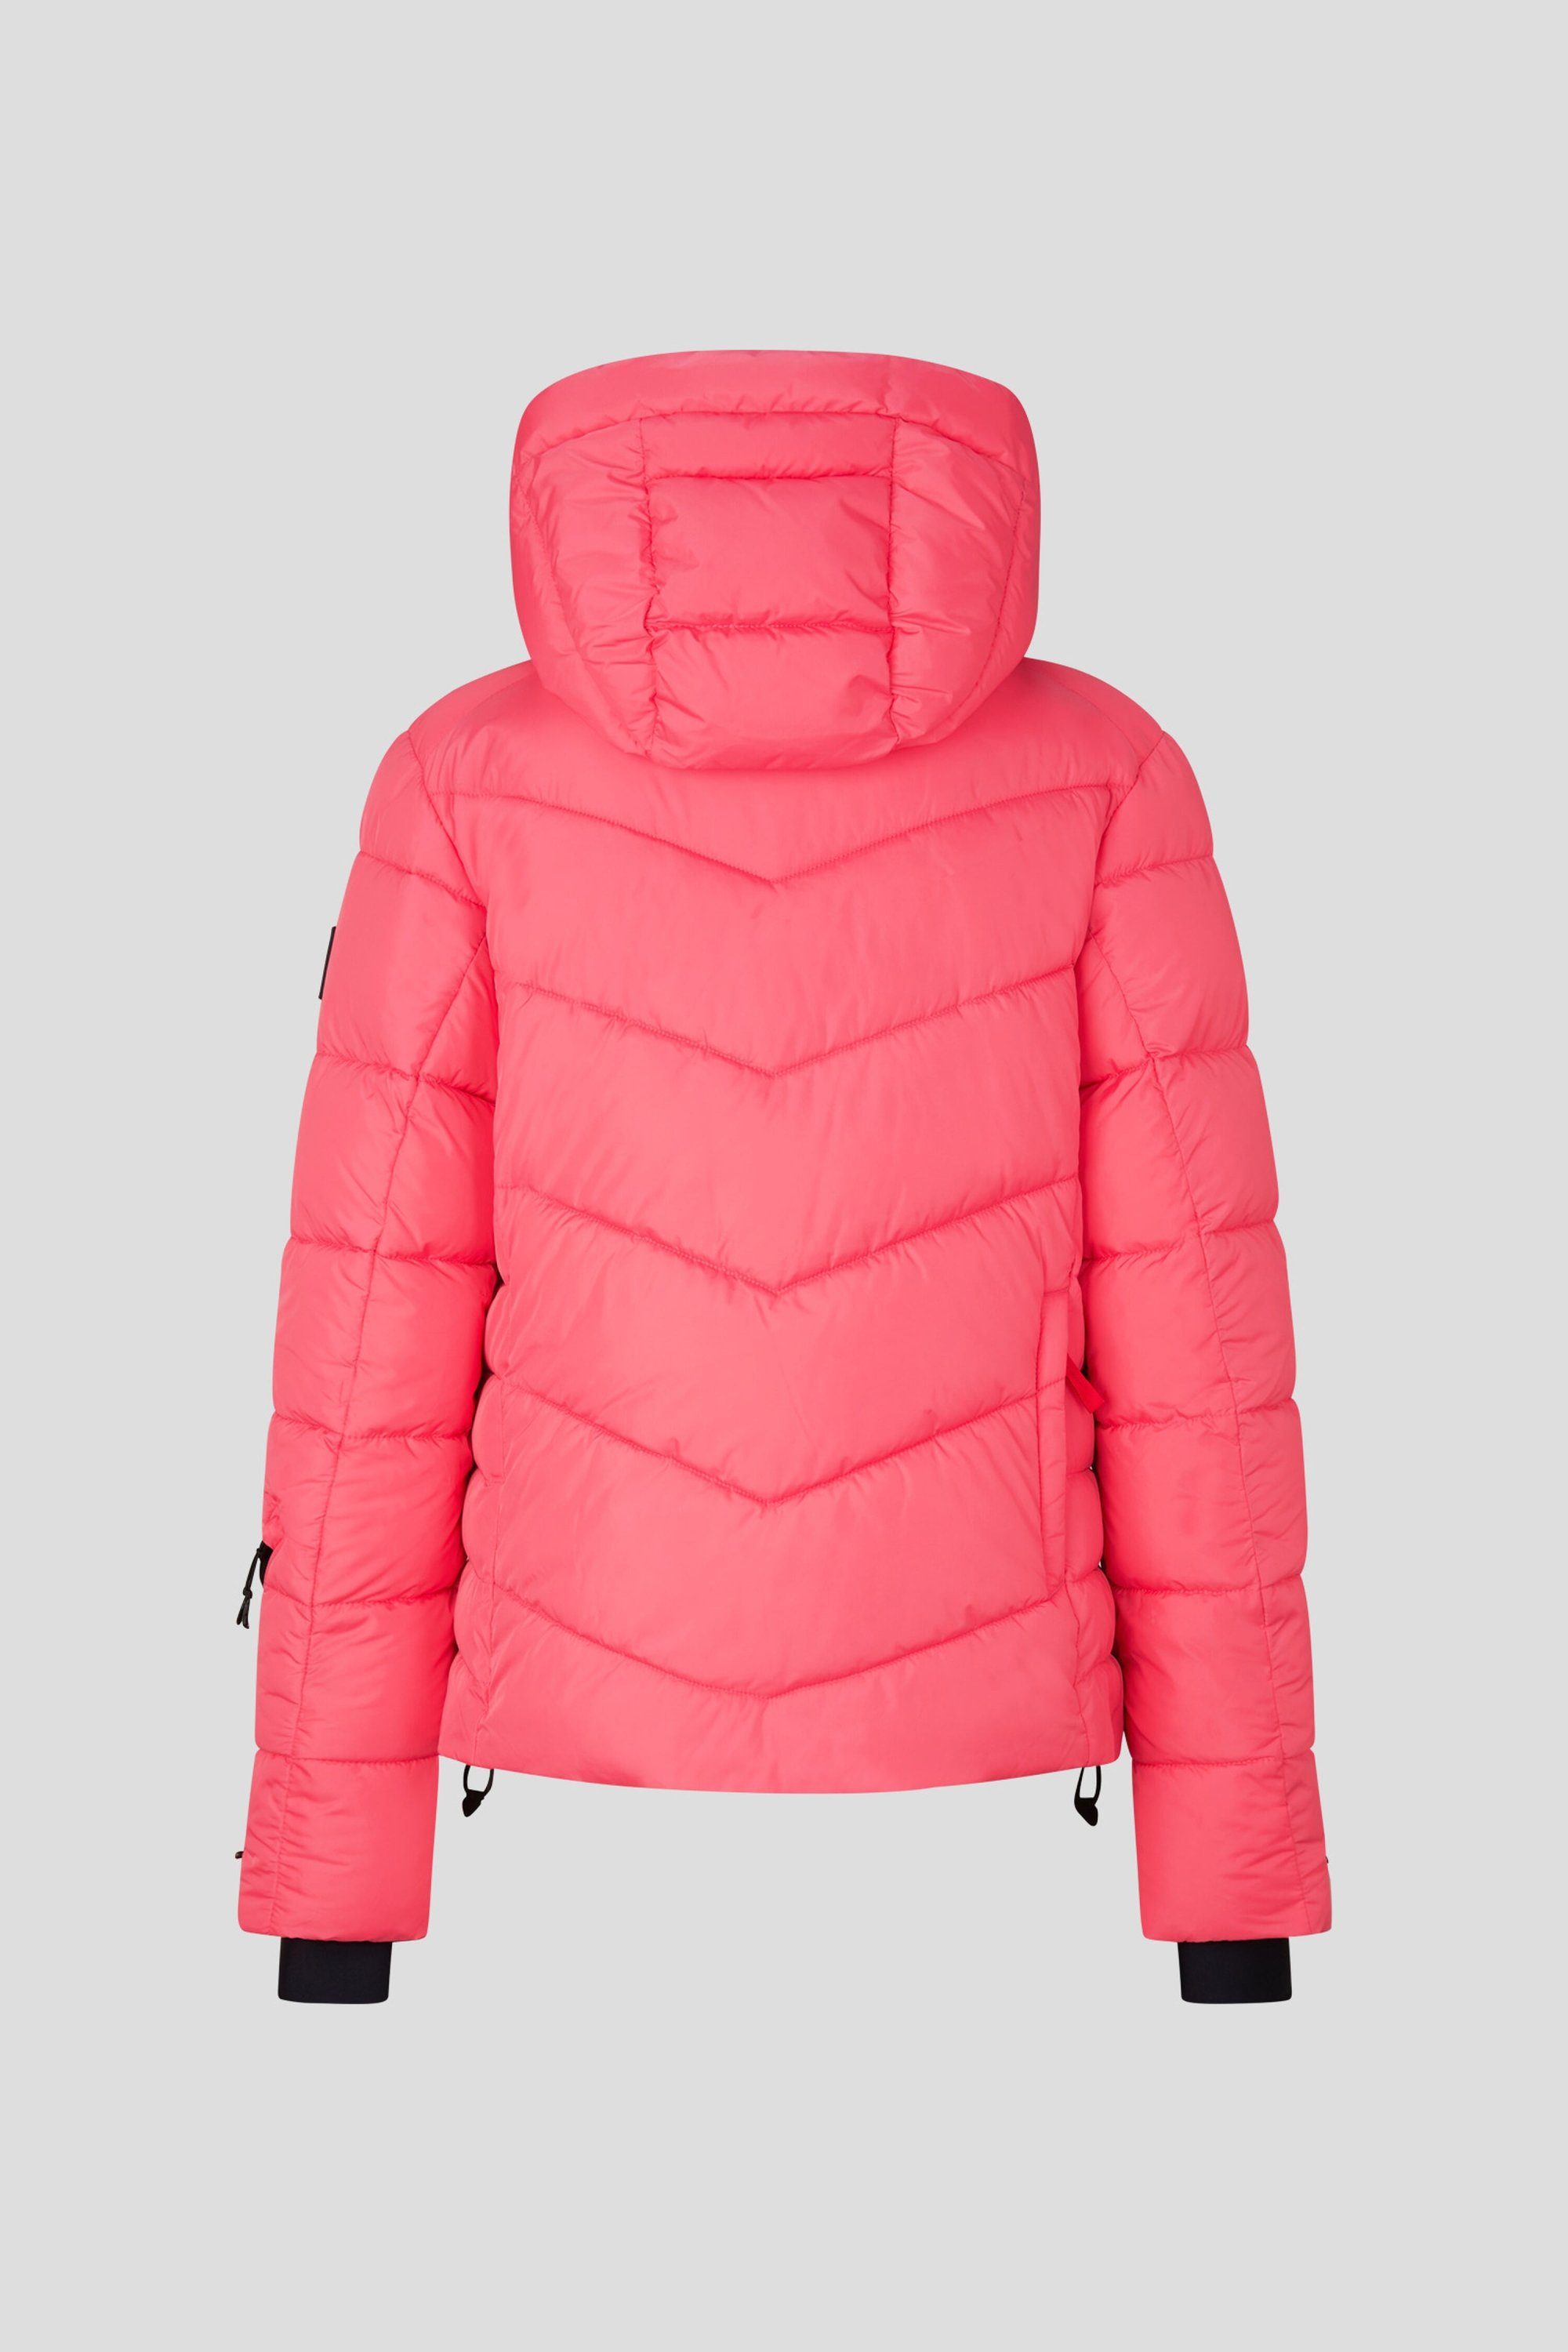 Kapuzensweatjacke SAELLY2 coral Bogner Fire pink Ice +